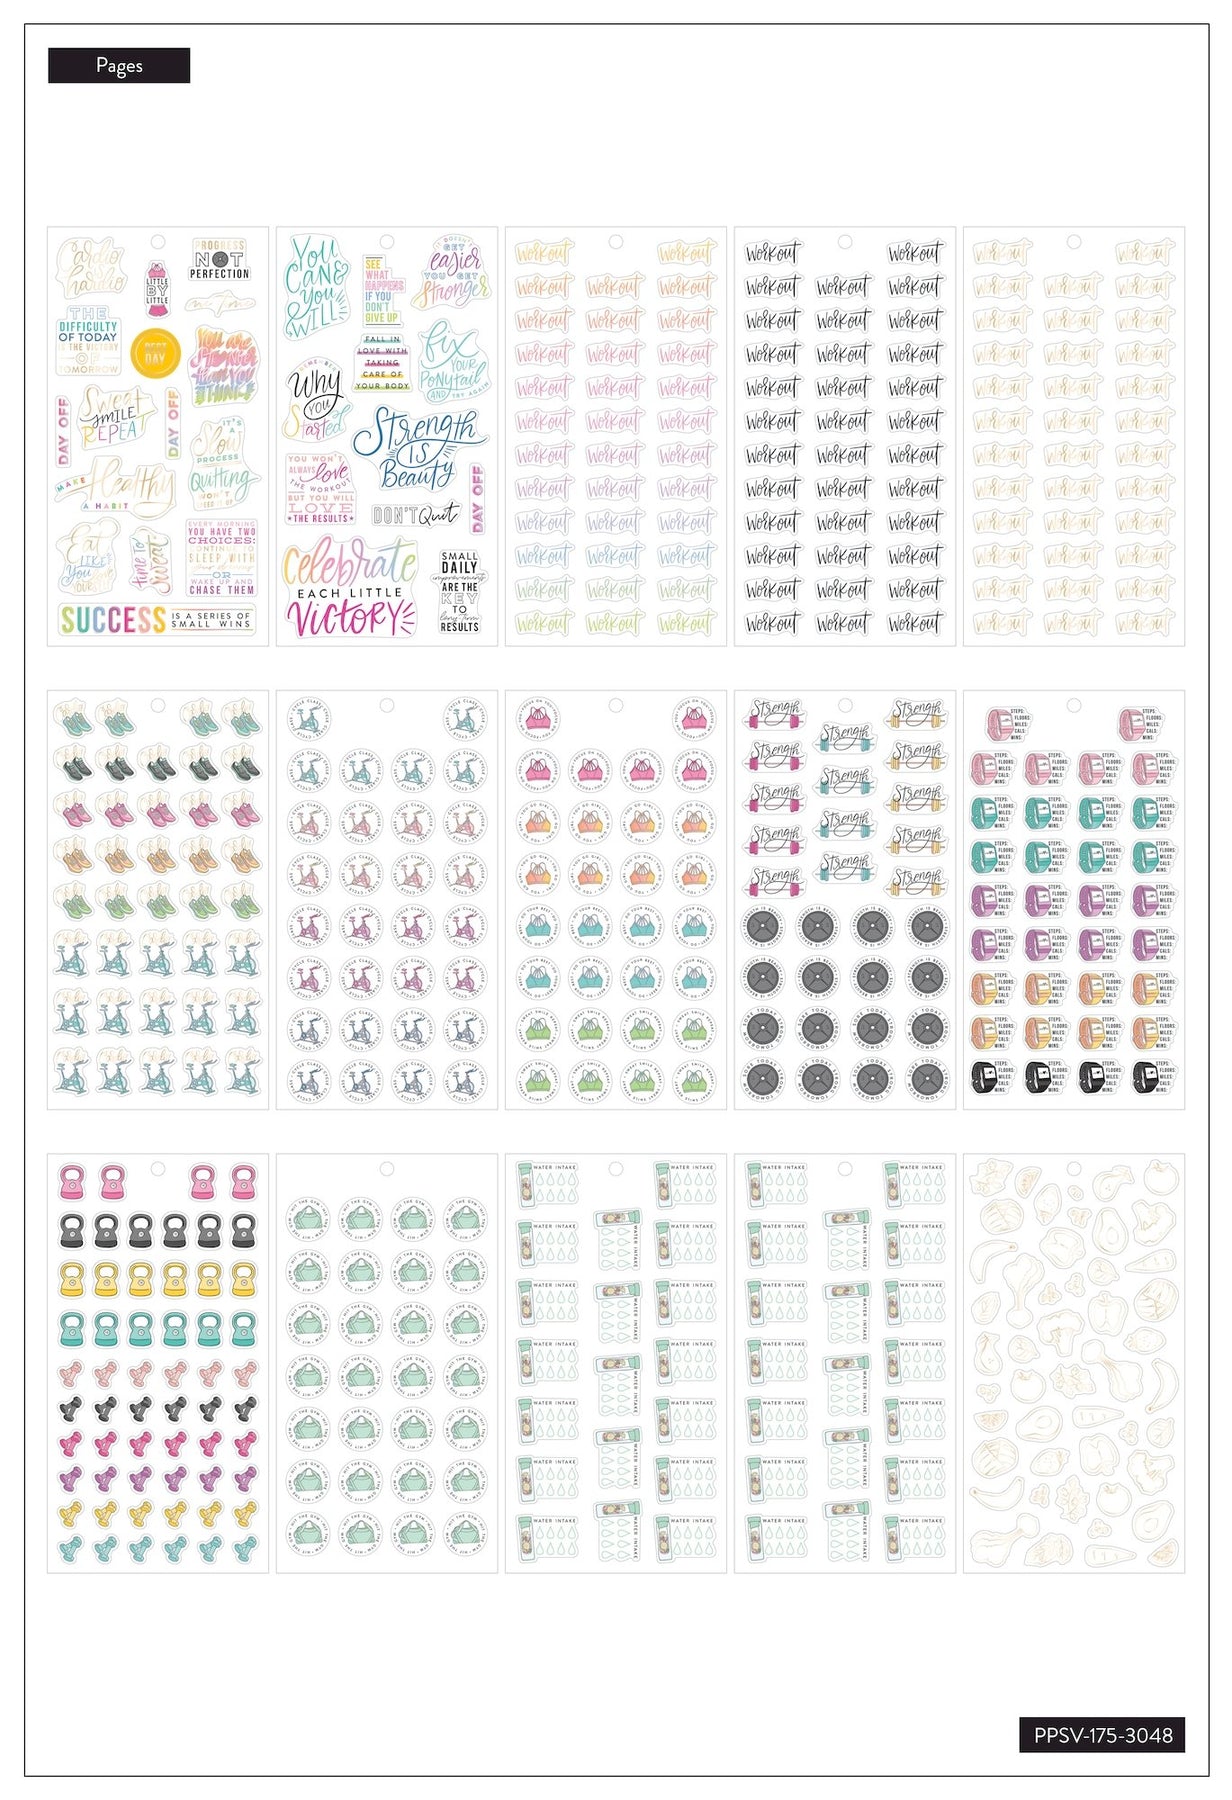  Health and Fitness Planner Stickers Set - Large Value Pack 20  Sticker Sheets - Health, Exercise, Weight Tracking and Meal Planning -  Custom Design Accessories and Supplies for Bullet Dotted Journals : Office  Products